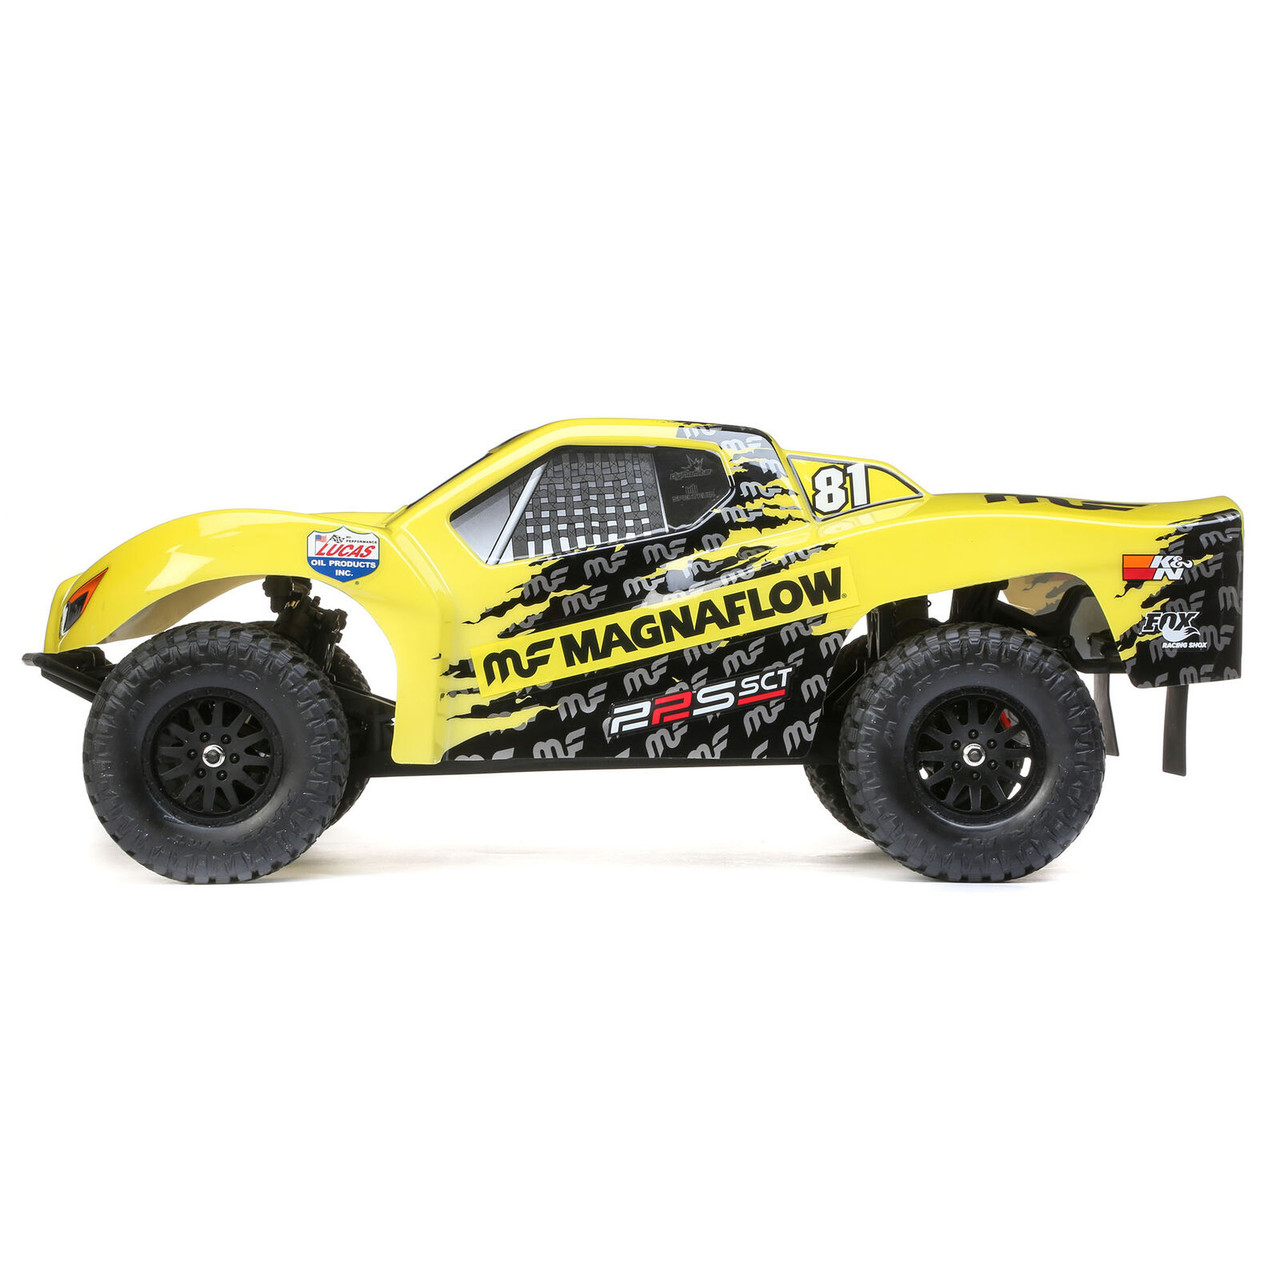 Losi 22S SCT 1/10 RTR 2WD Brushed Short Course Truck (Magnaflow) w/ 2.4GHz Radio